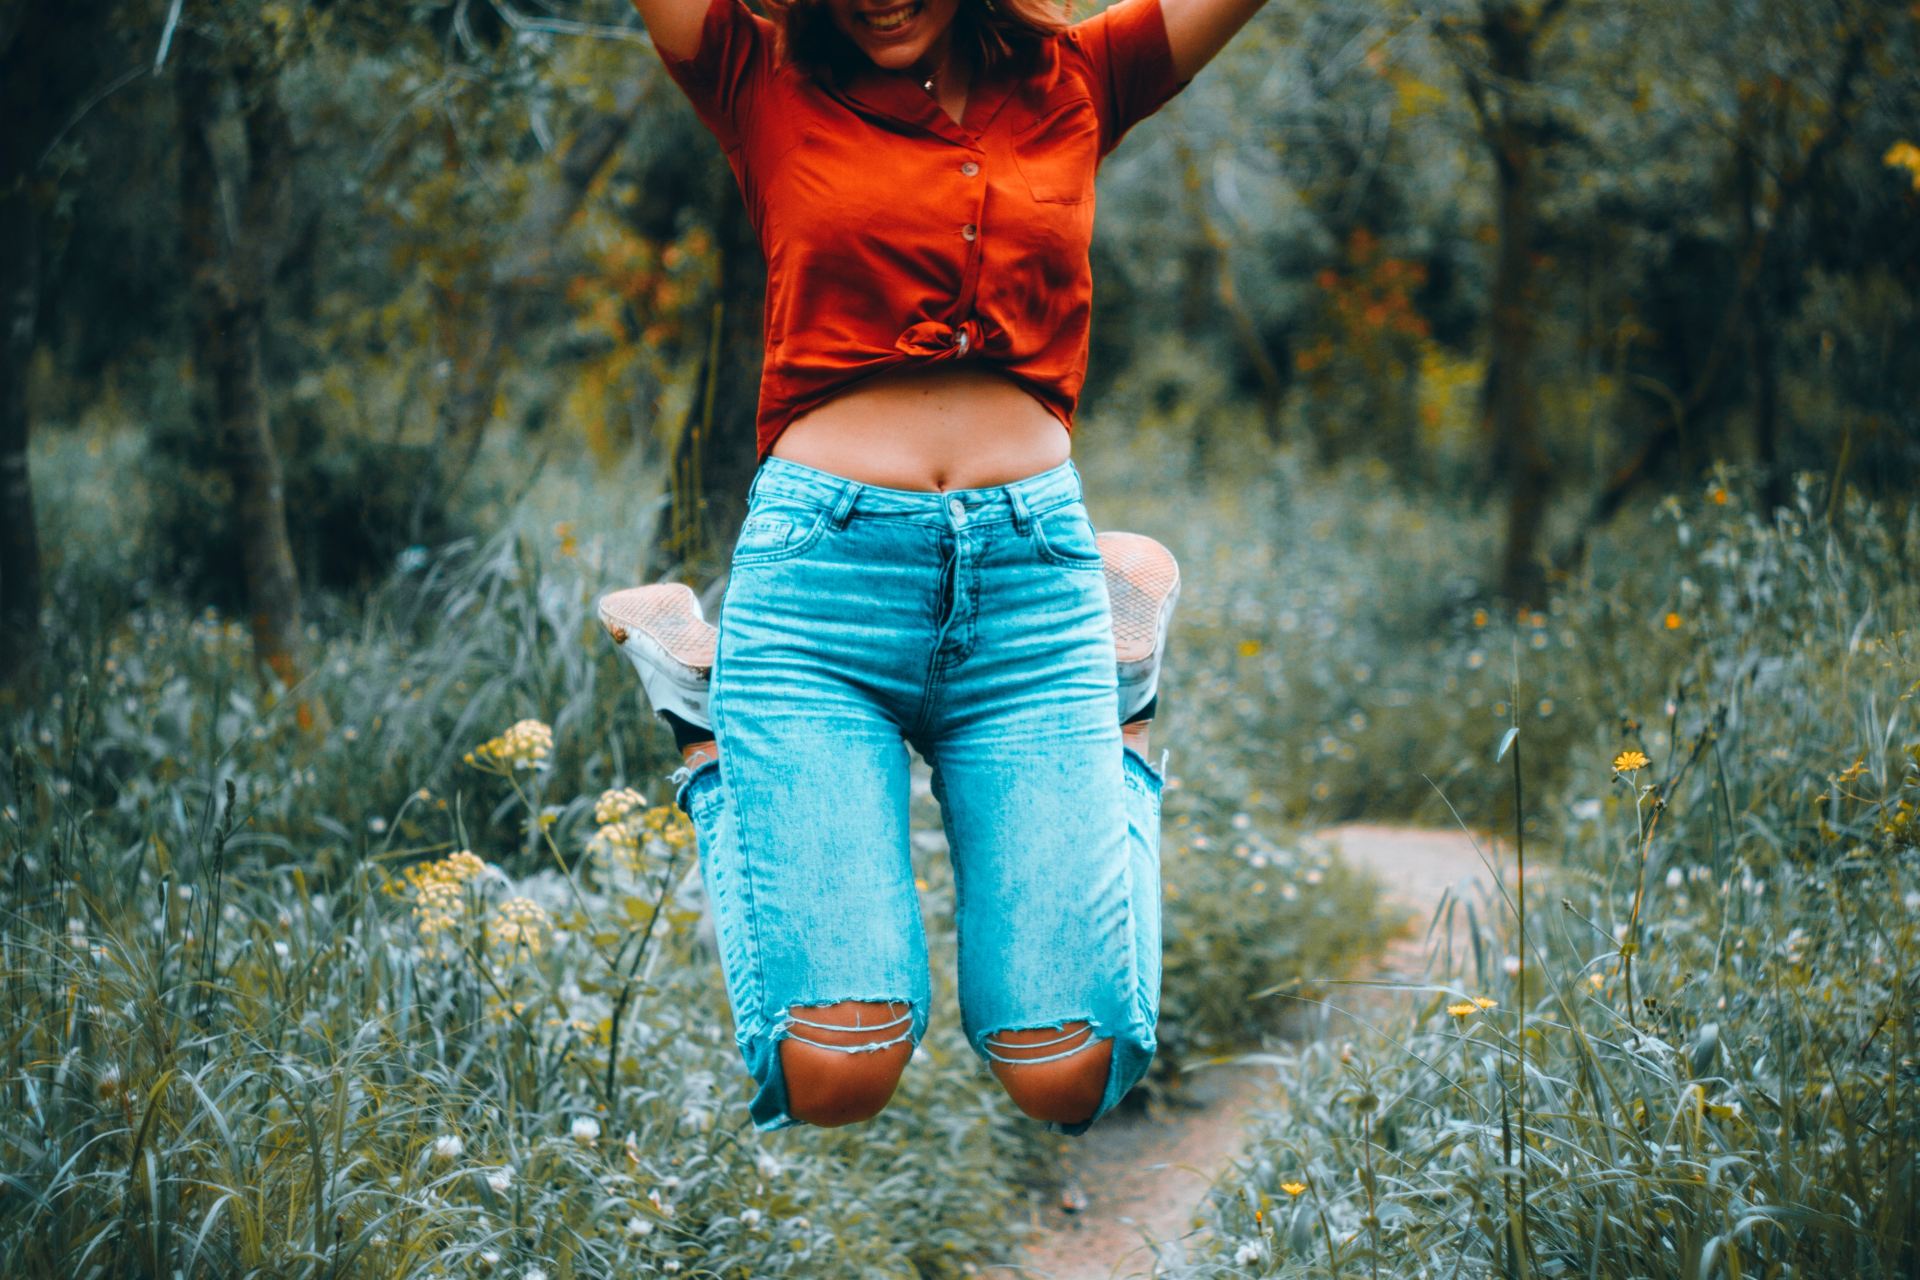 woman in orange t-shirt and blue denim jeans standing on green grass field during daytime